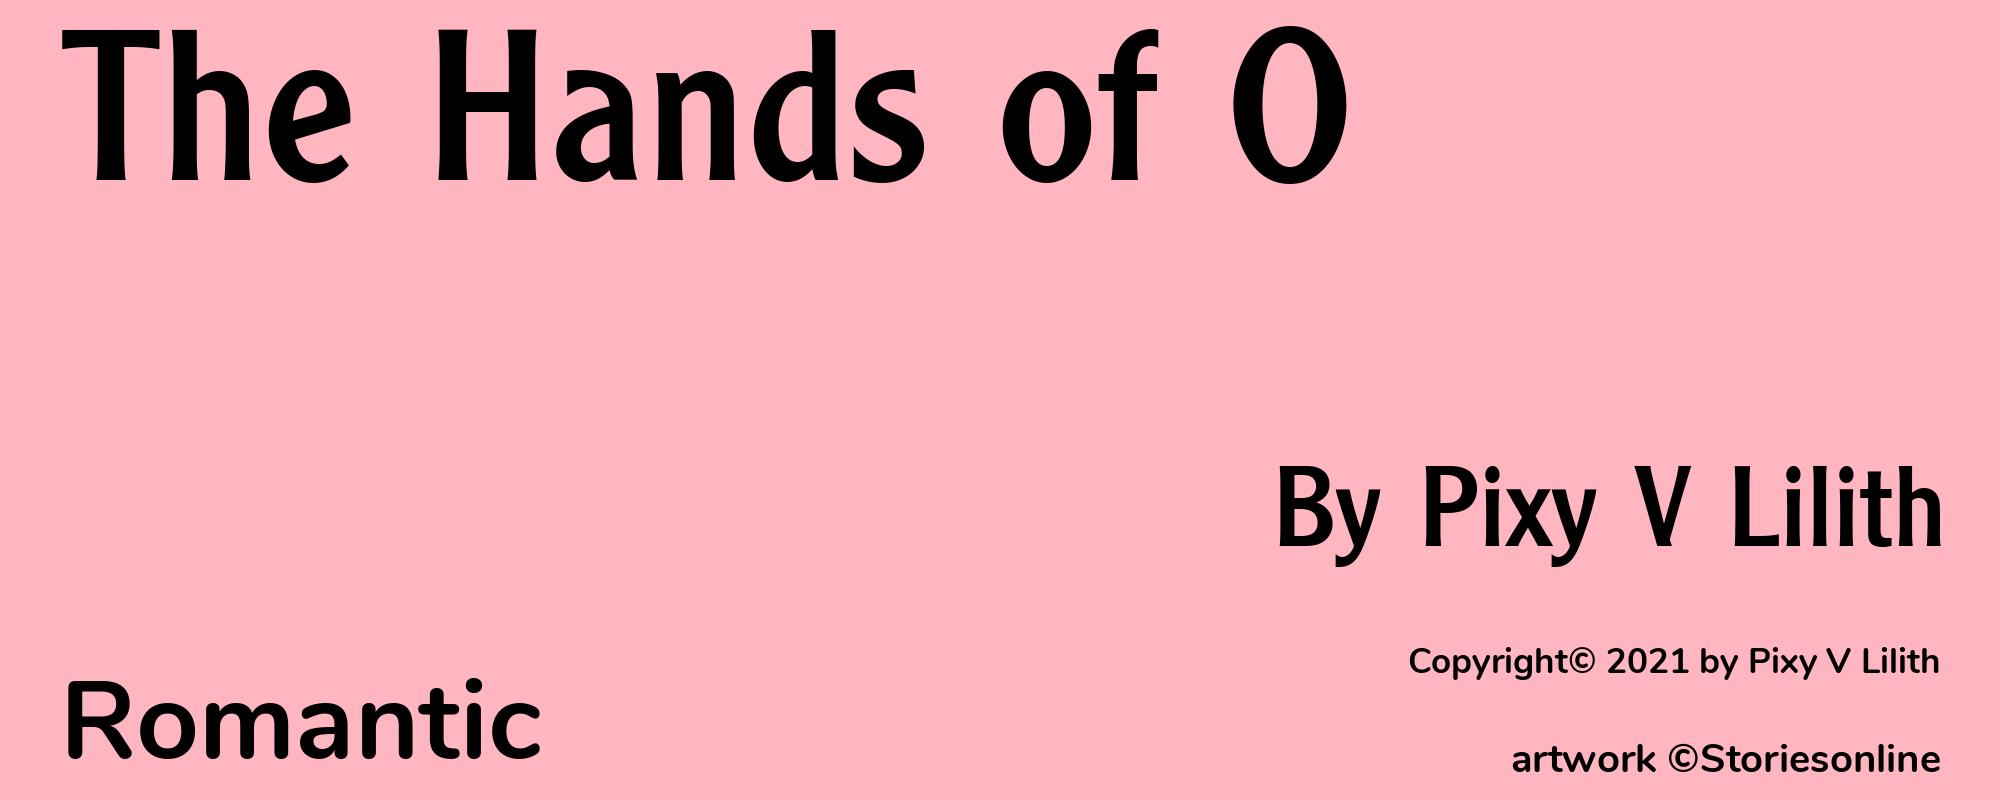 The Hands of O - Cover